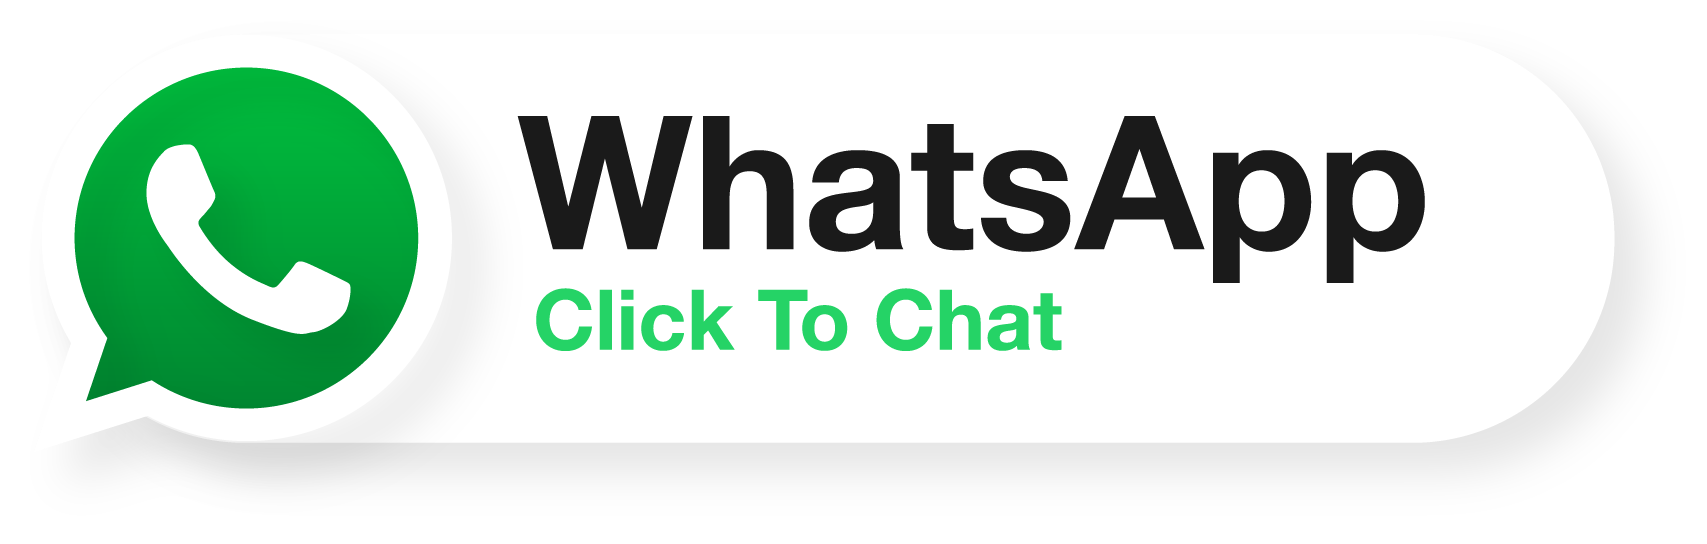 whatsapp icon and button that can be clicked to start a chat with Suhaana Ghar business Whatsapp number